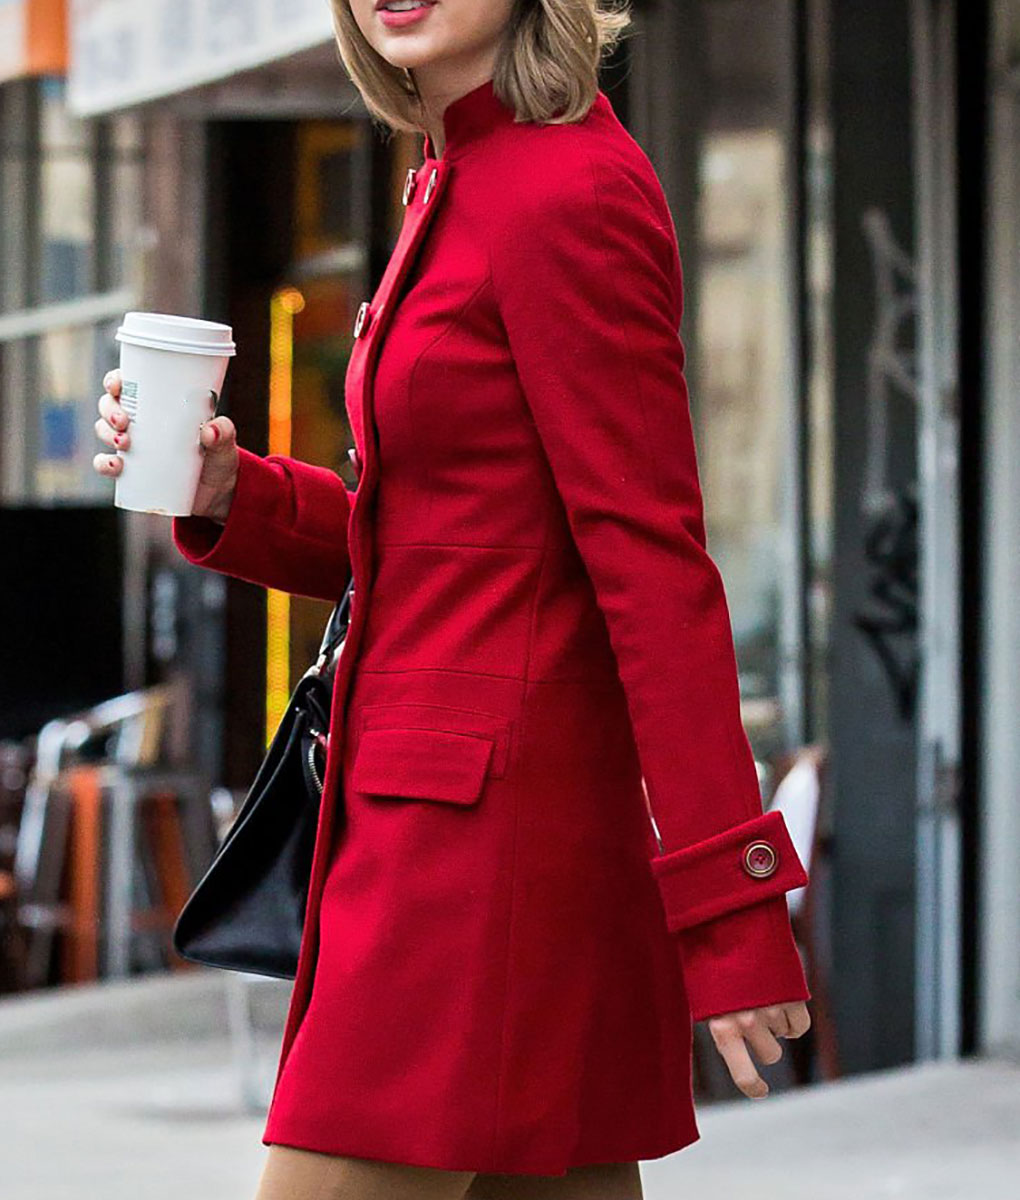 Taylor Swift Double Breasted Red Coat (2)